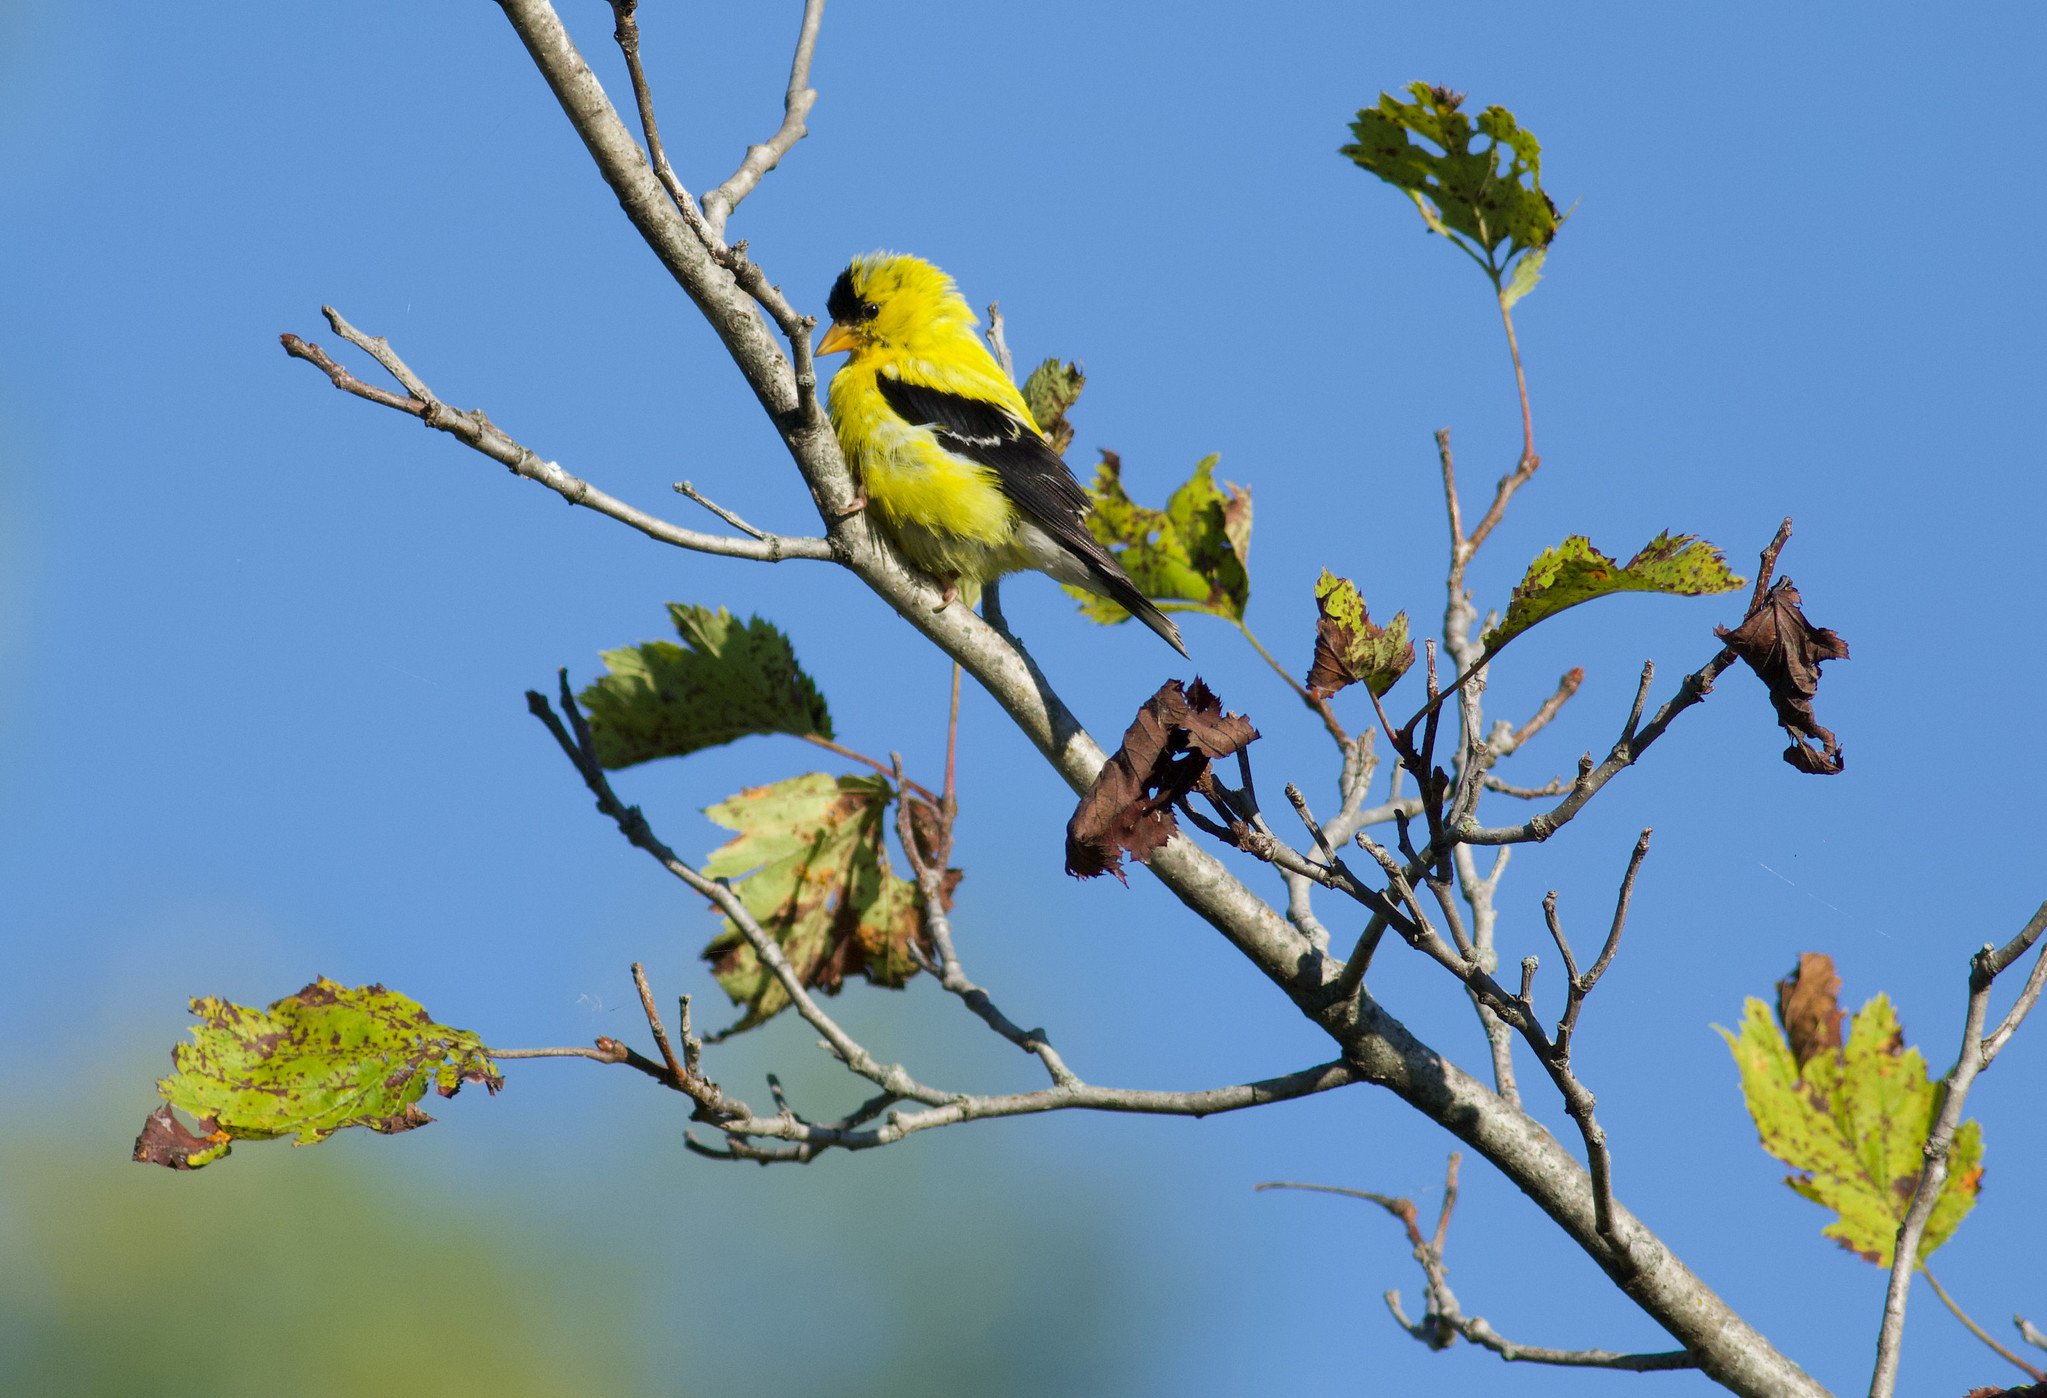 An American Goldfinch sits on a tree branch with sparse foliage.